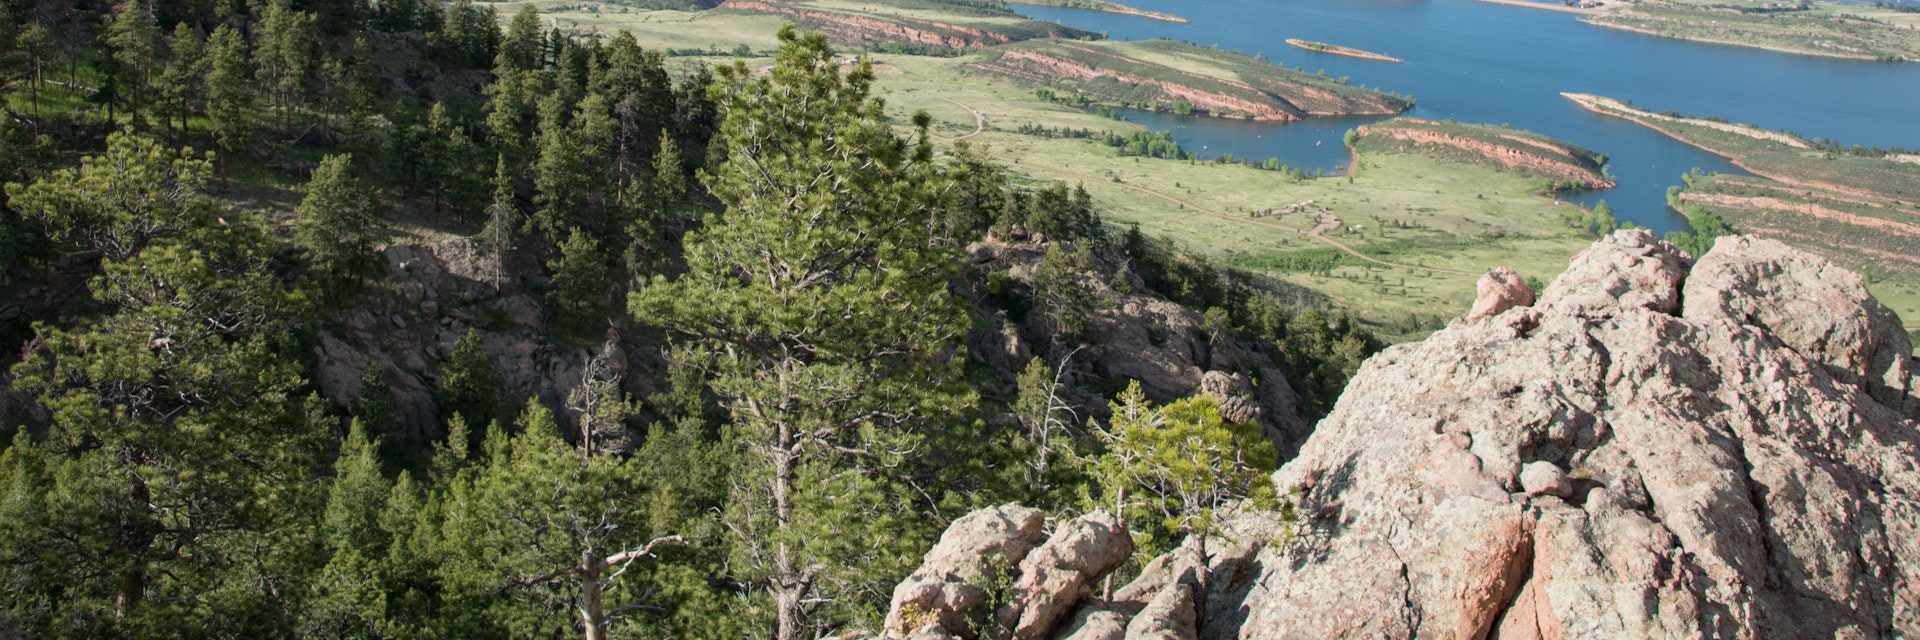 A view from Arthur's Rock in Lory State Park.